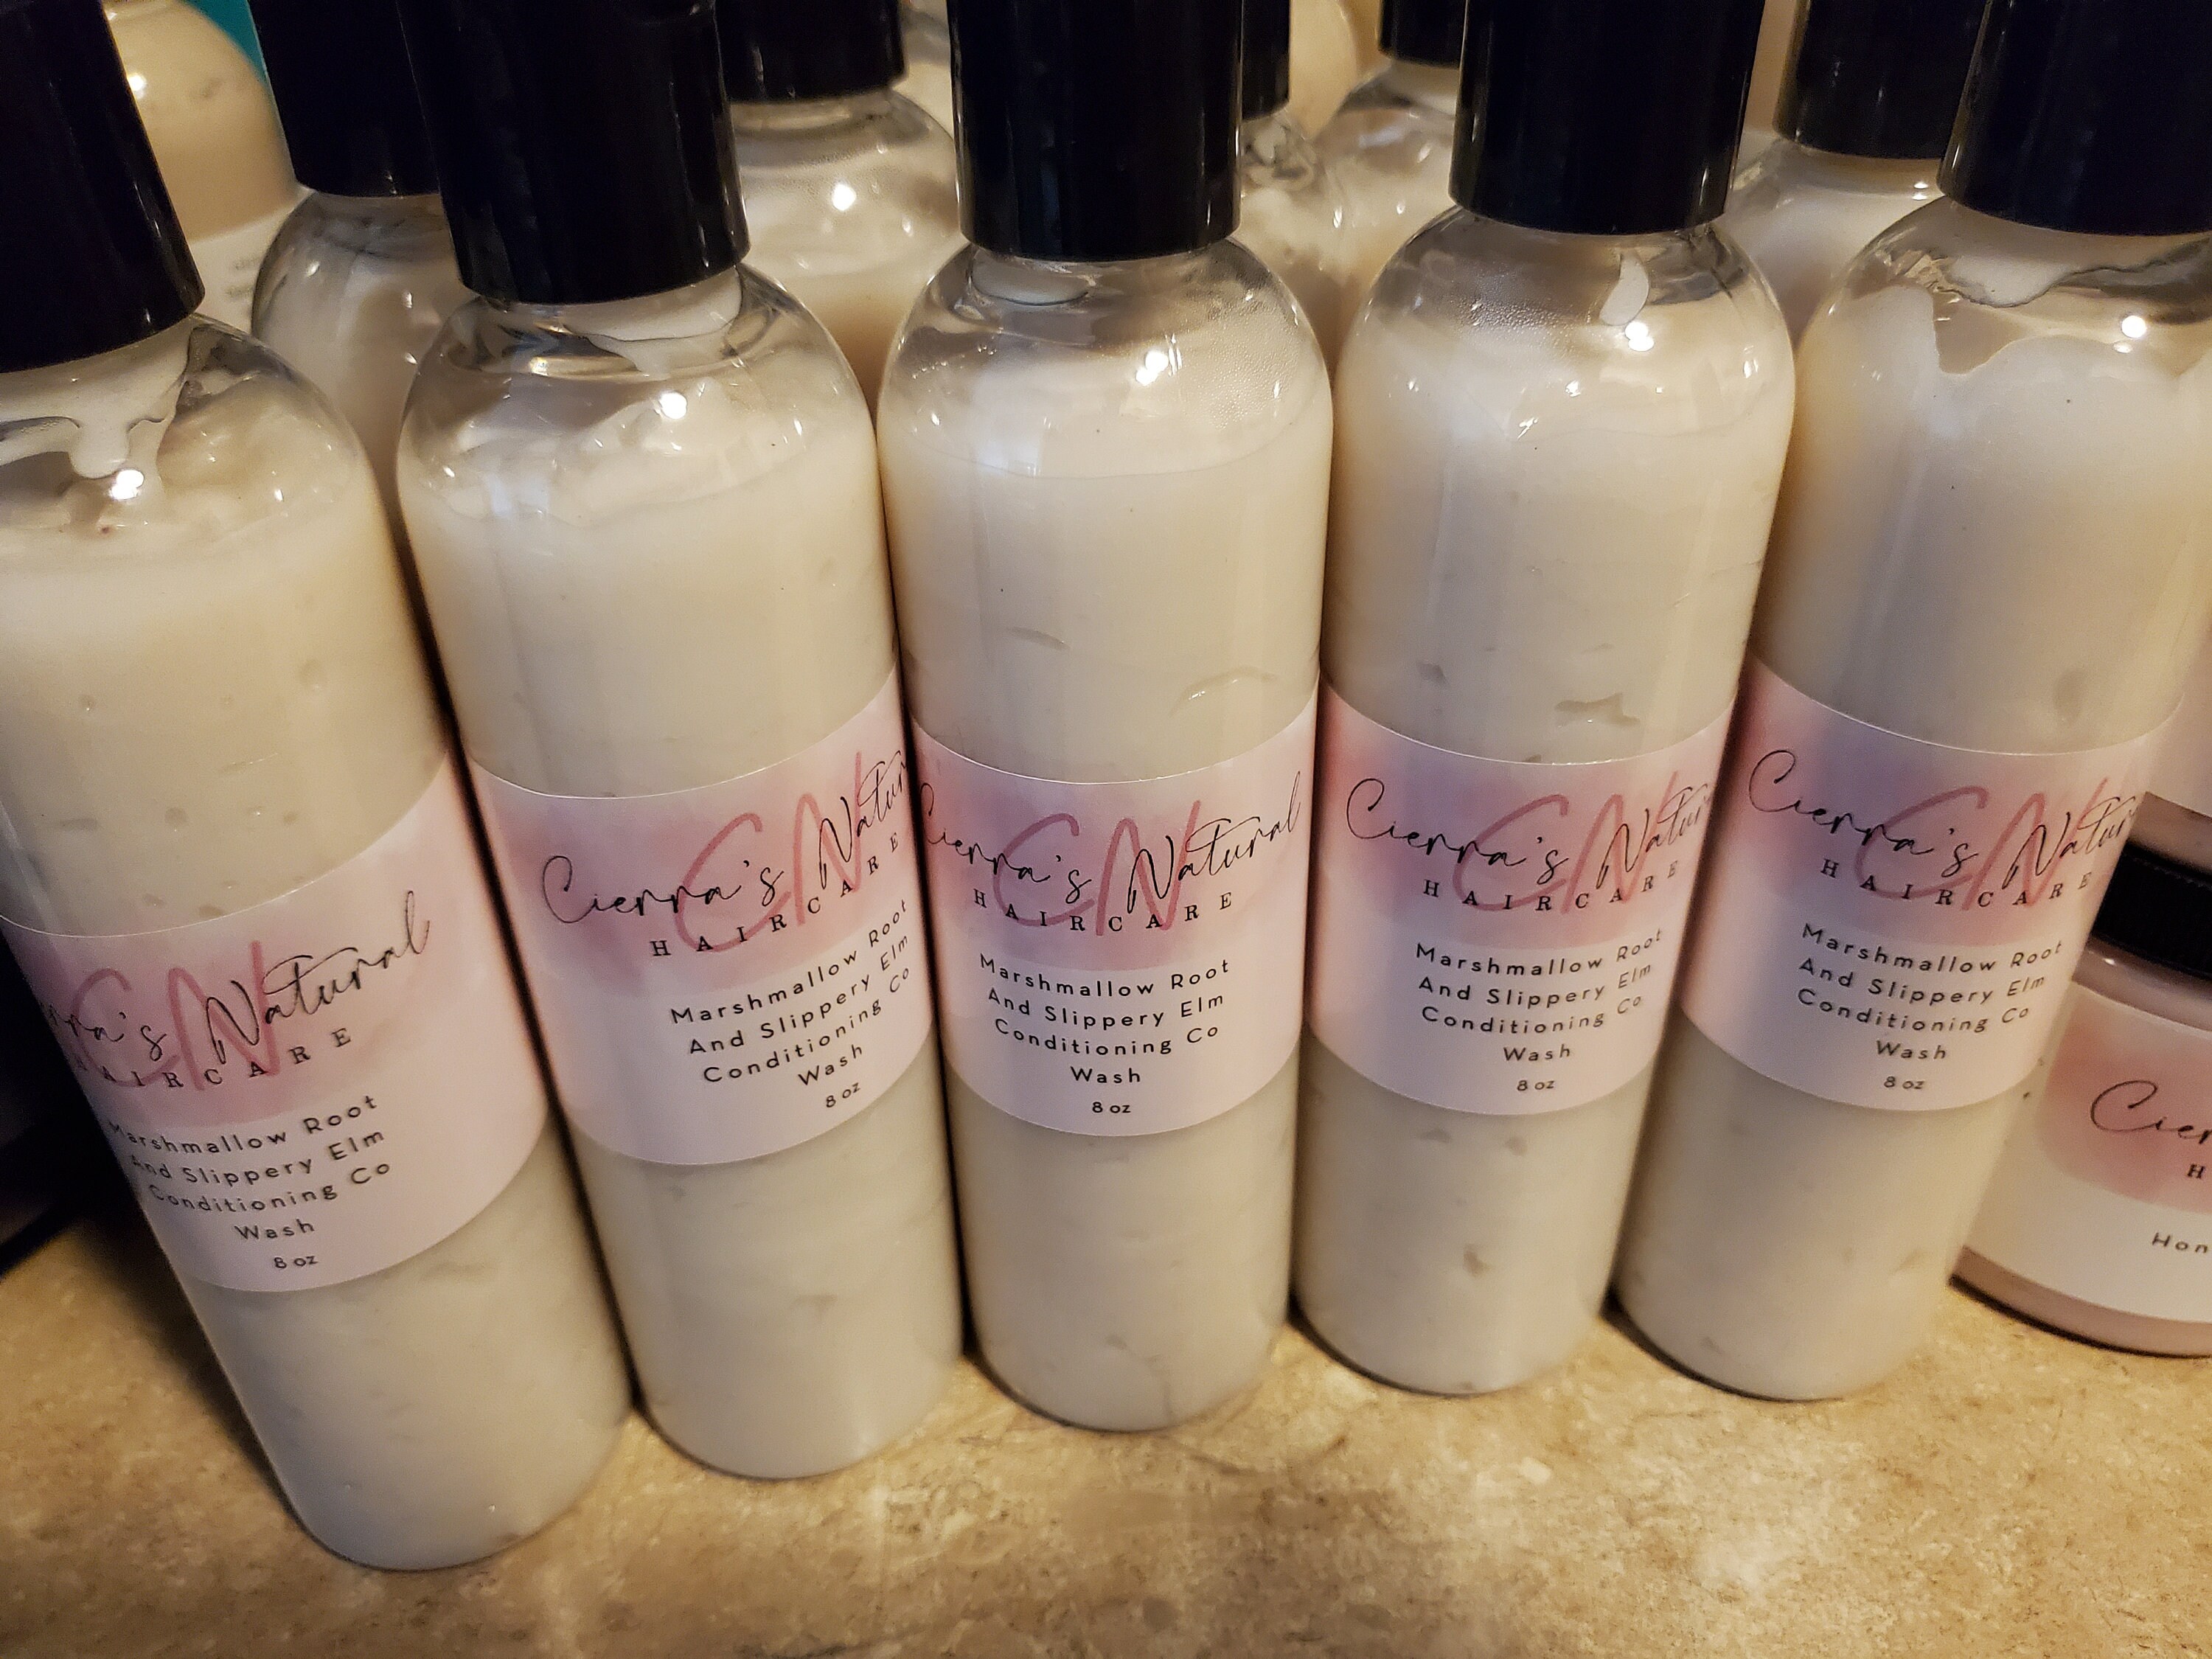 Marshmallow Root and Slippery Elm Conditioning Co Wash - Etsy